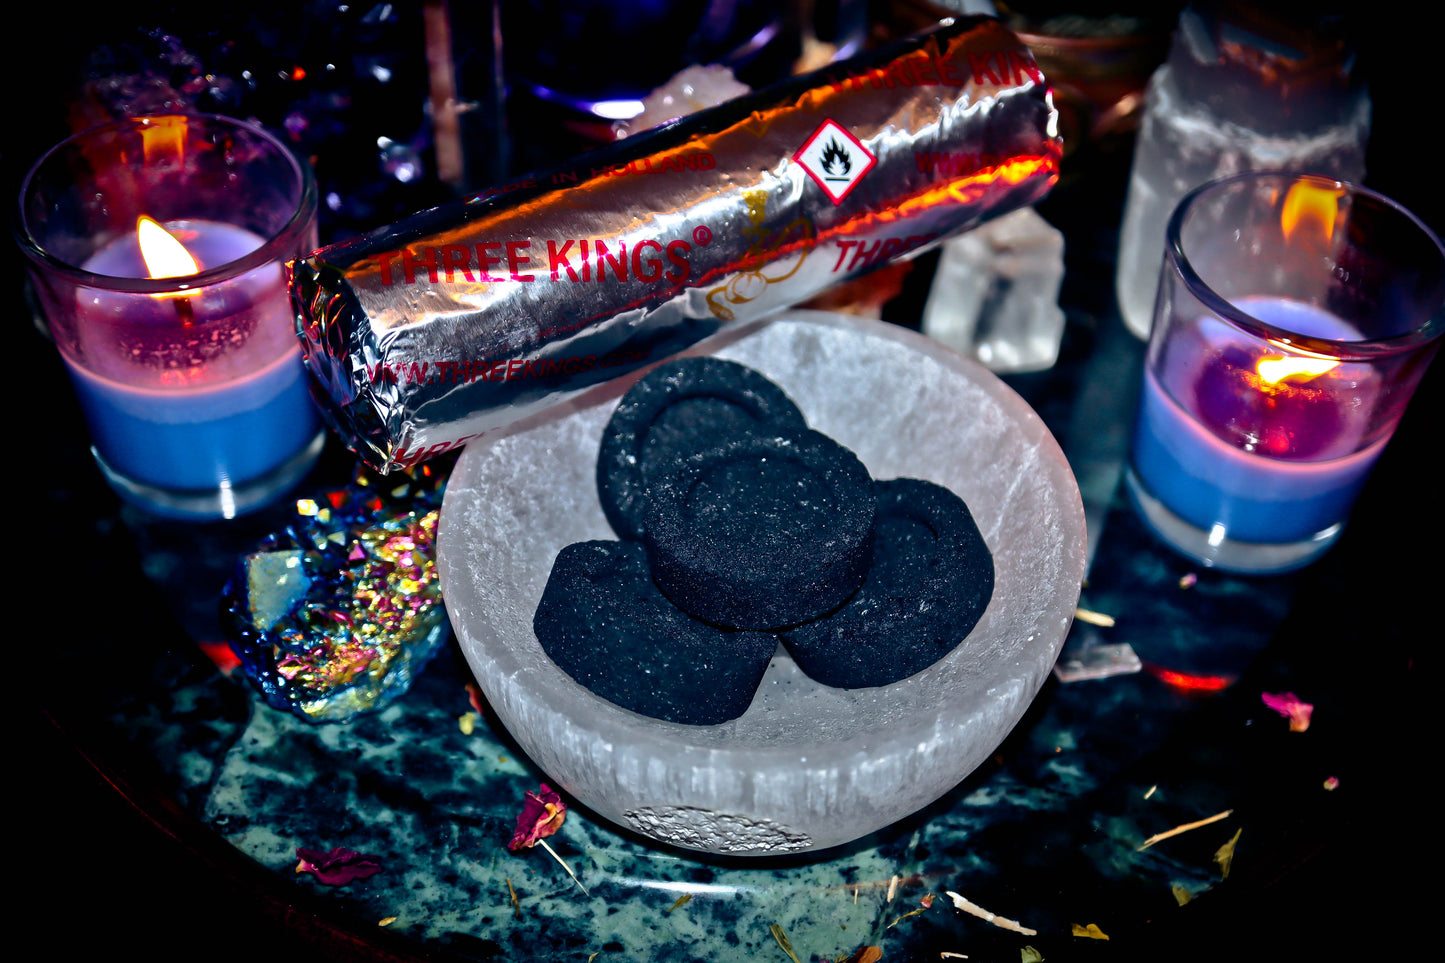 CHARCOAL DISK TABLET 33mm Self Lighting ~ One Roll of 10 Disks ~ For Spirit Offerings of Incense, Resin & Herbs!